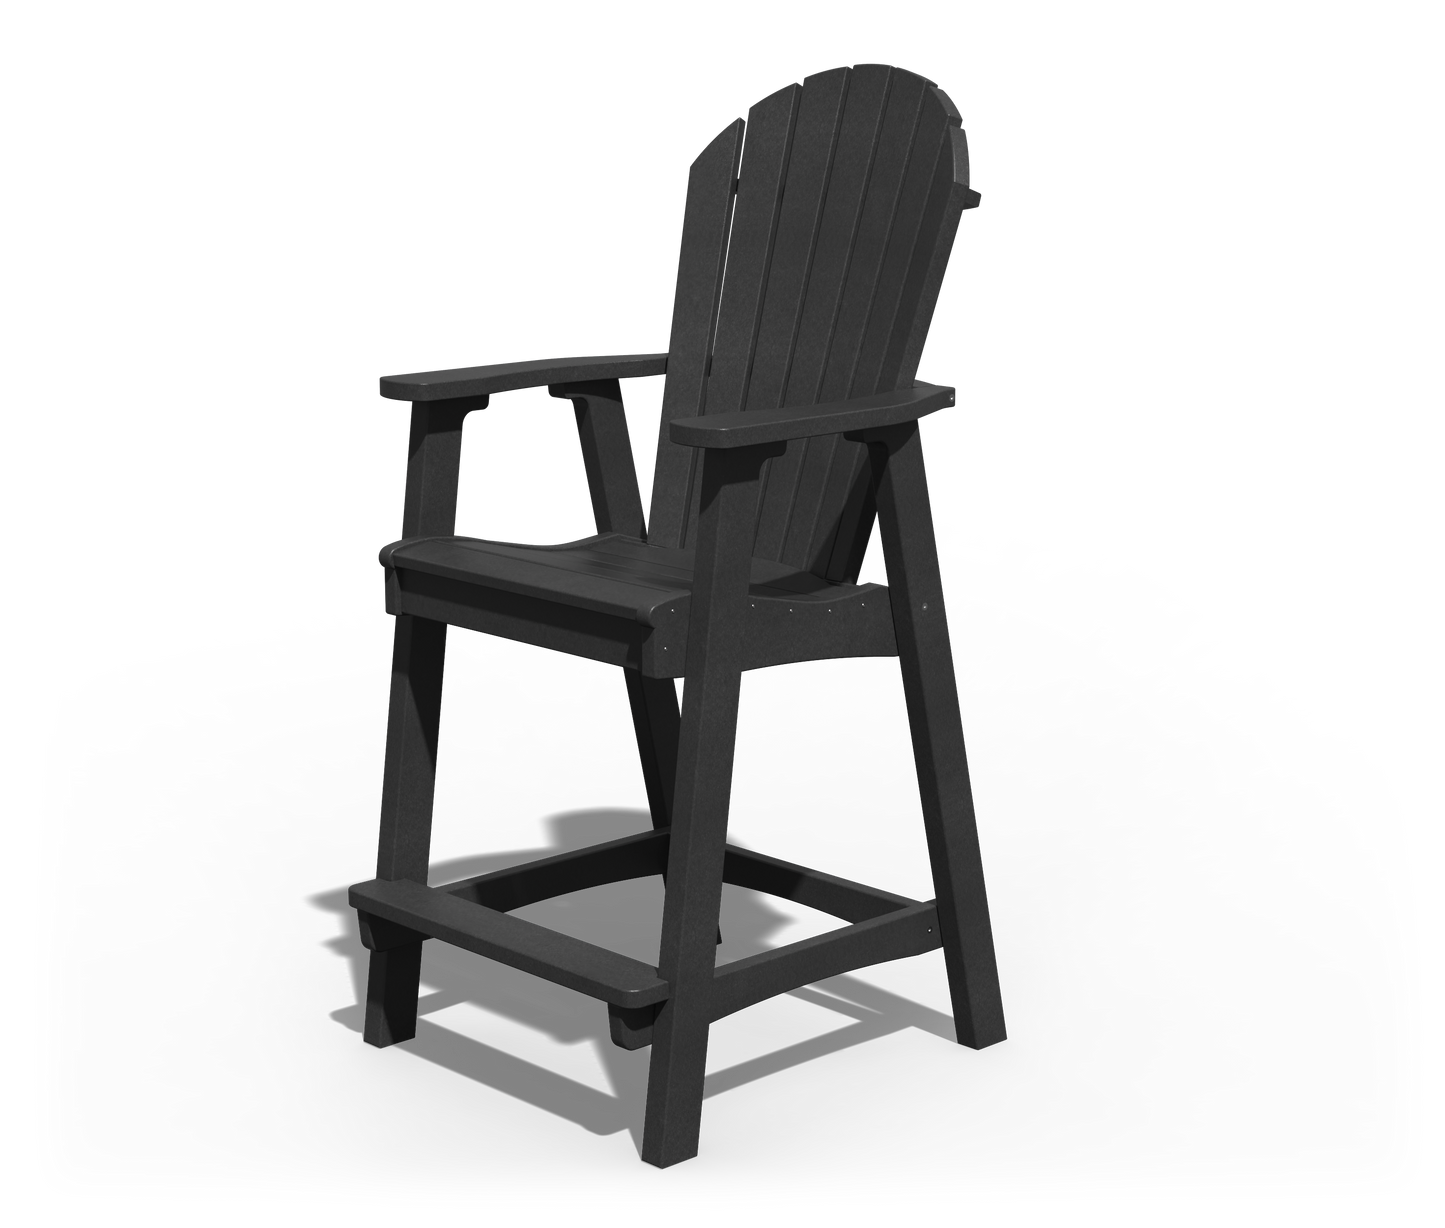 Patiova Recycled Plastic Amish Crafted Adirondack Bar Chair - LEAD TIME TO SHIP 3 WEEKS